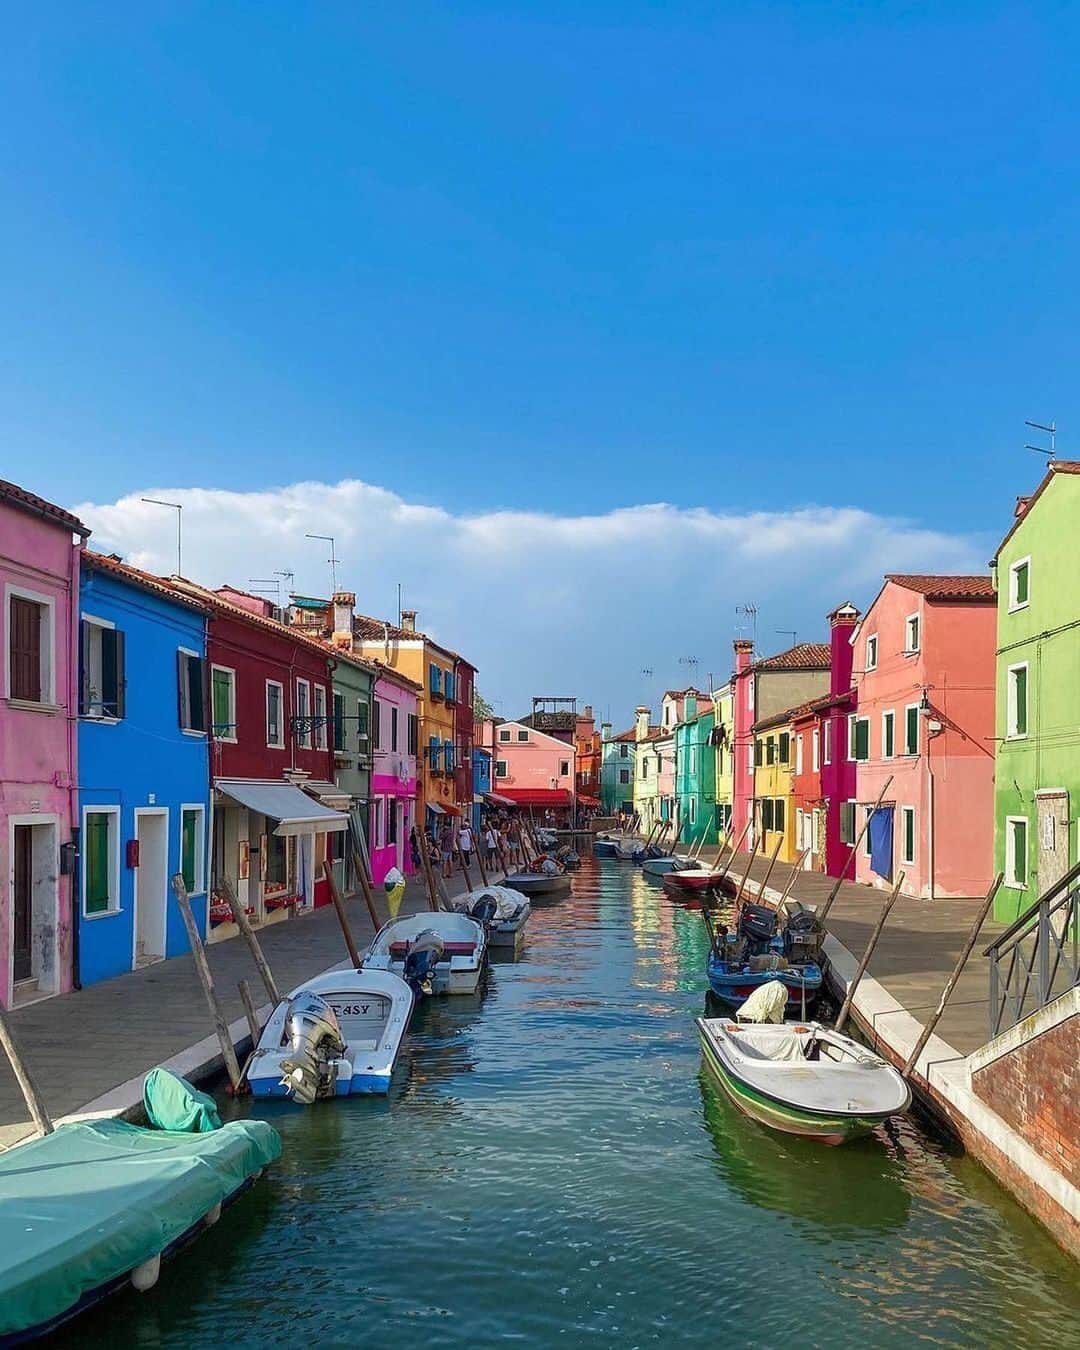 PicLab™ Sayingsのインスタグラム：「Welcome to the colorful village of Burano. 🌈 This little fishing island is located in the Northern Venetian Lagoon and is known for its bright colored buildings. Be sure to visit this destination on your next trip to Venice!  Photo 1, 3 by @sam_wonderlands  Photo 2 by @franksyphotos」